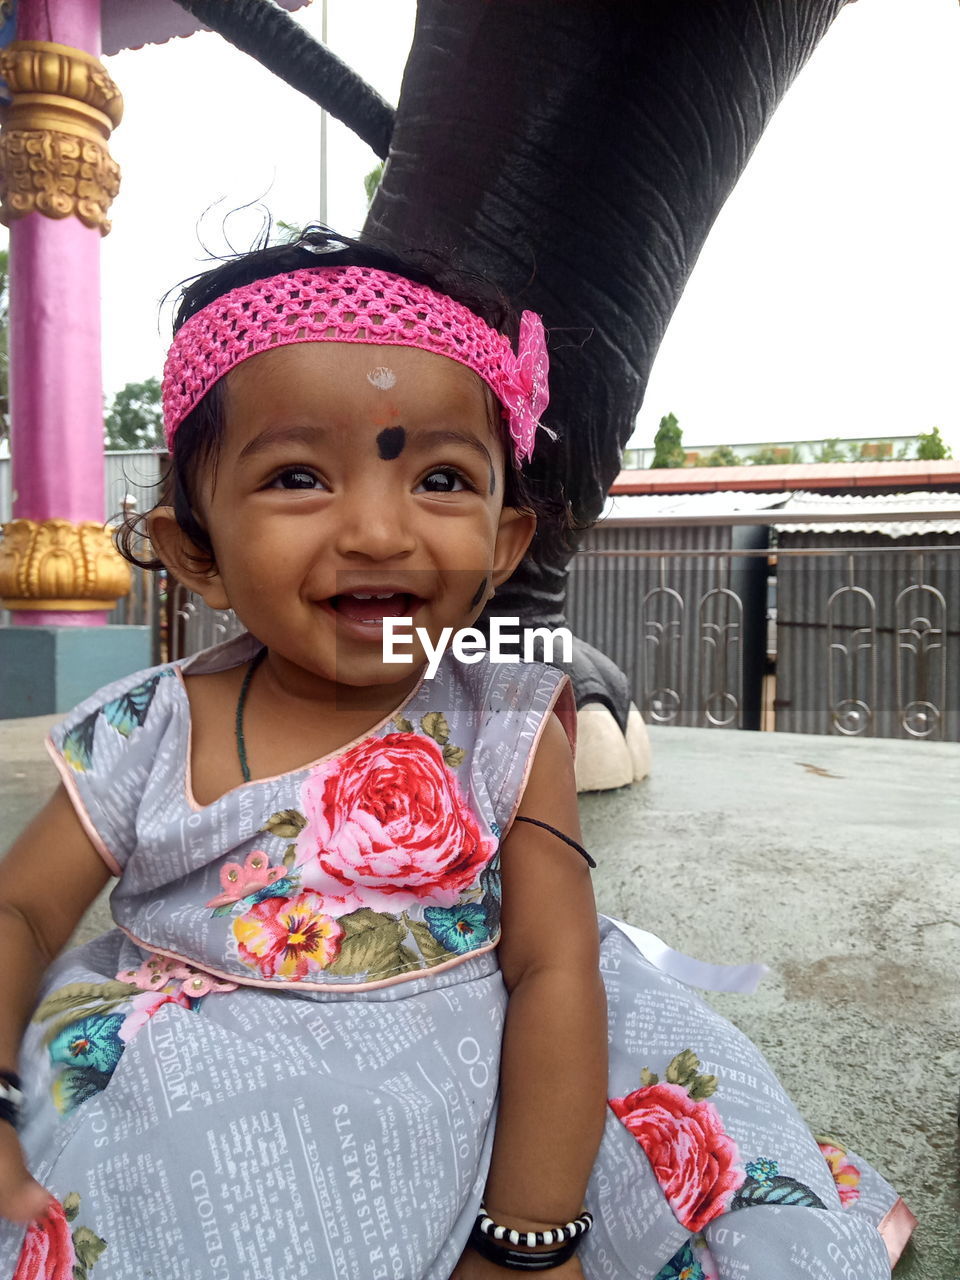 childhood, child, one person, portrait, toddler, looking at camera, women, smiling, clothing, female, happiness, front view, person, cute, emotion, day, baby, lifestyles, innocence, architecture, fashion accessory, sitting, three quarter length, casual clothing, hat, outdoors, leisure activity, nature, cheerful, traditional clothing, human face, built structure